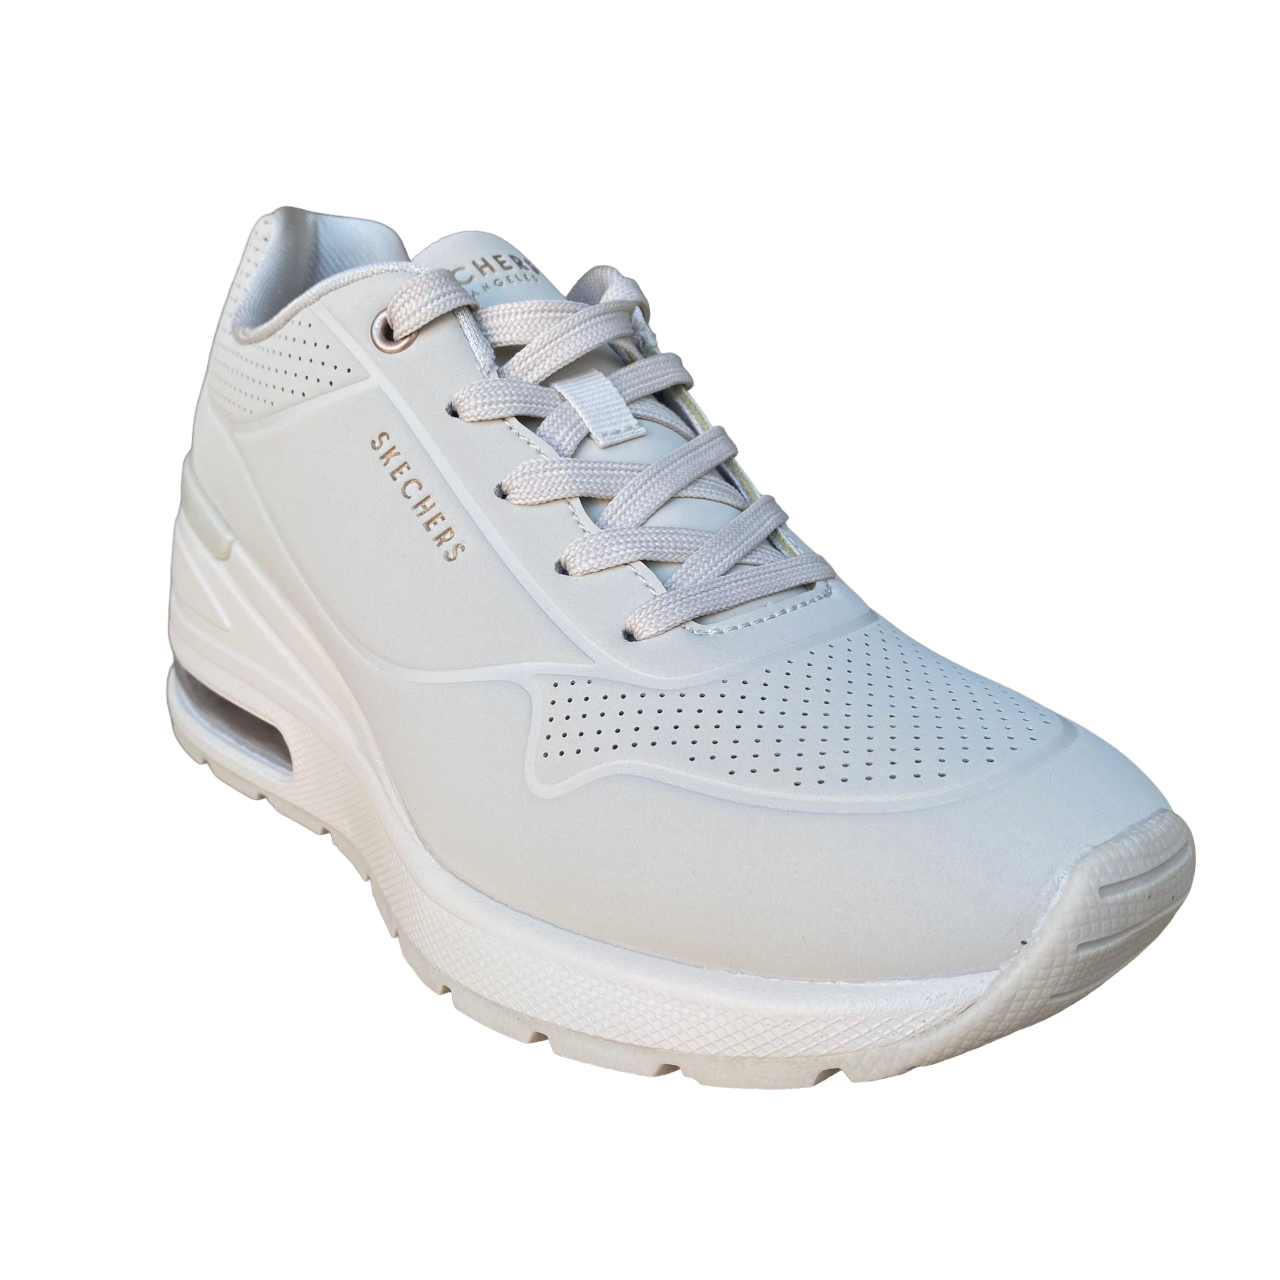 Skechers Million Air Elevated women&#39;s sneakers shoe 155401/OFWT off white